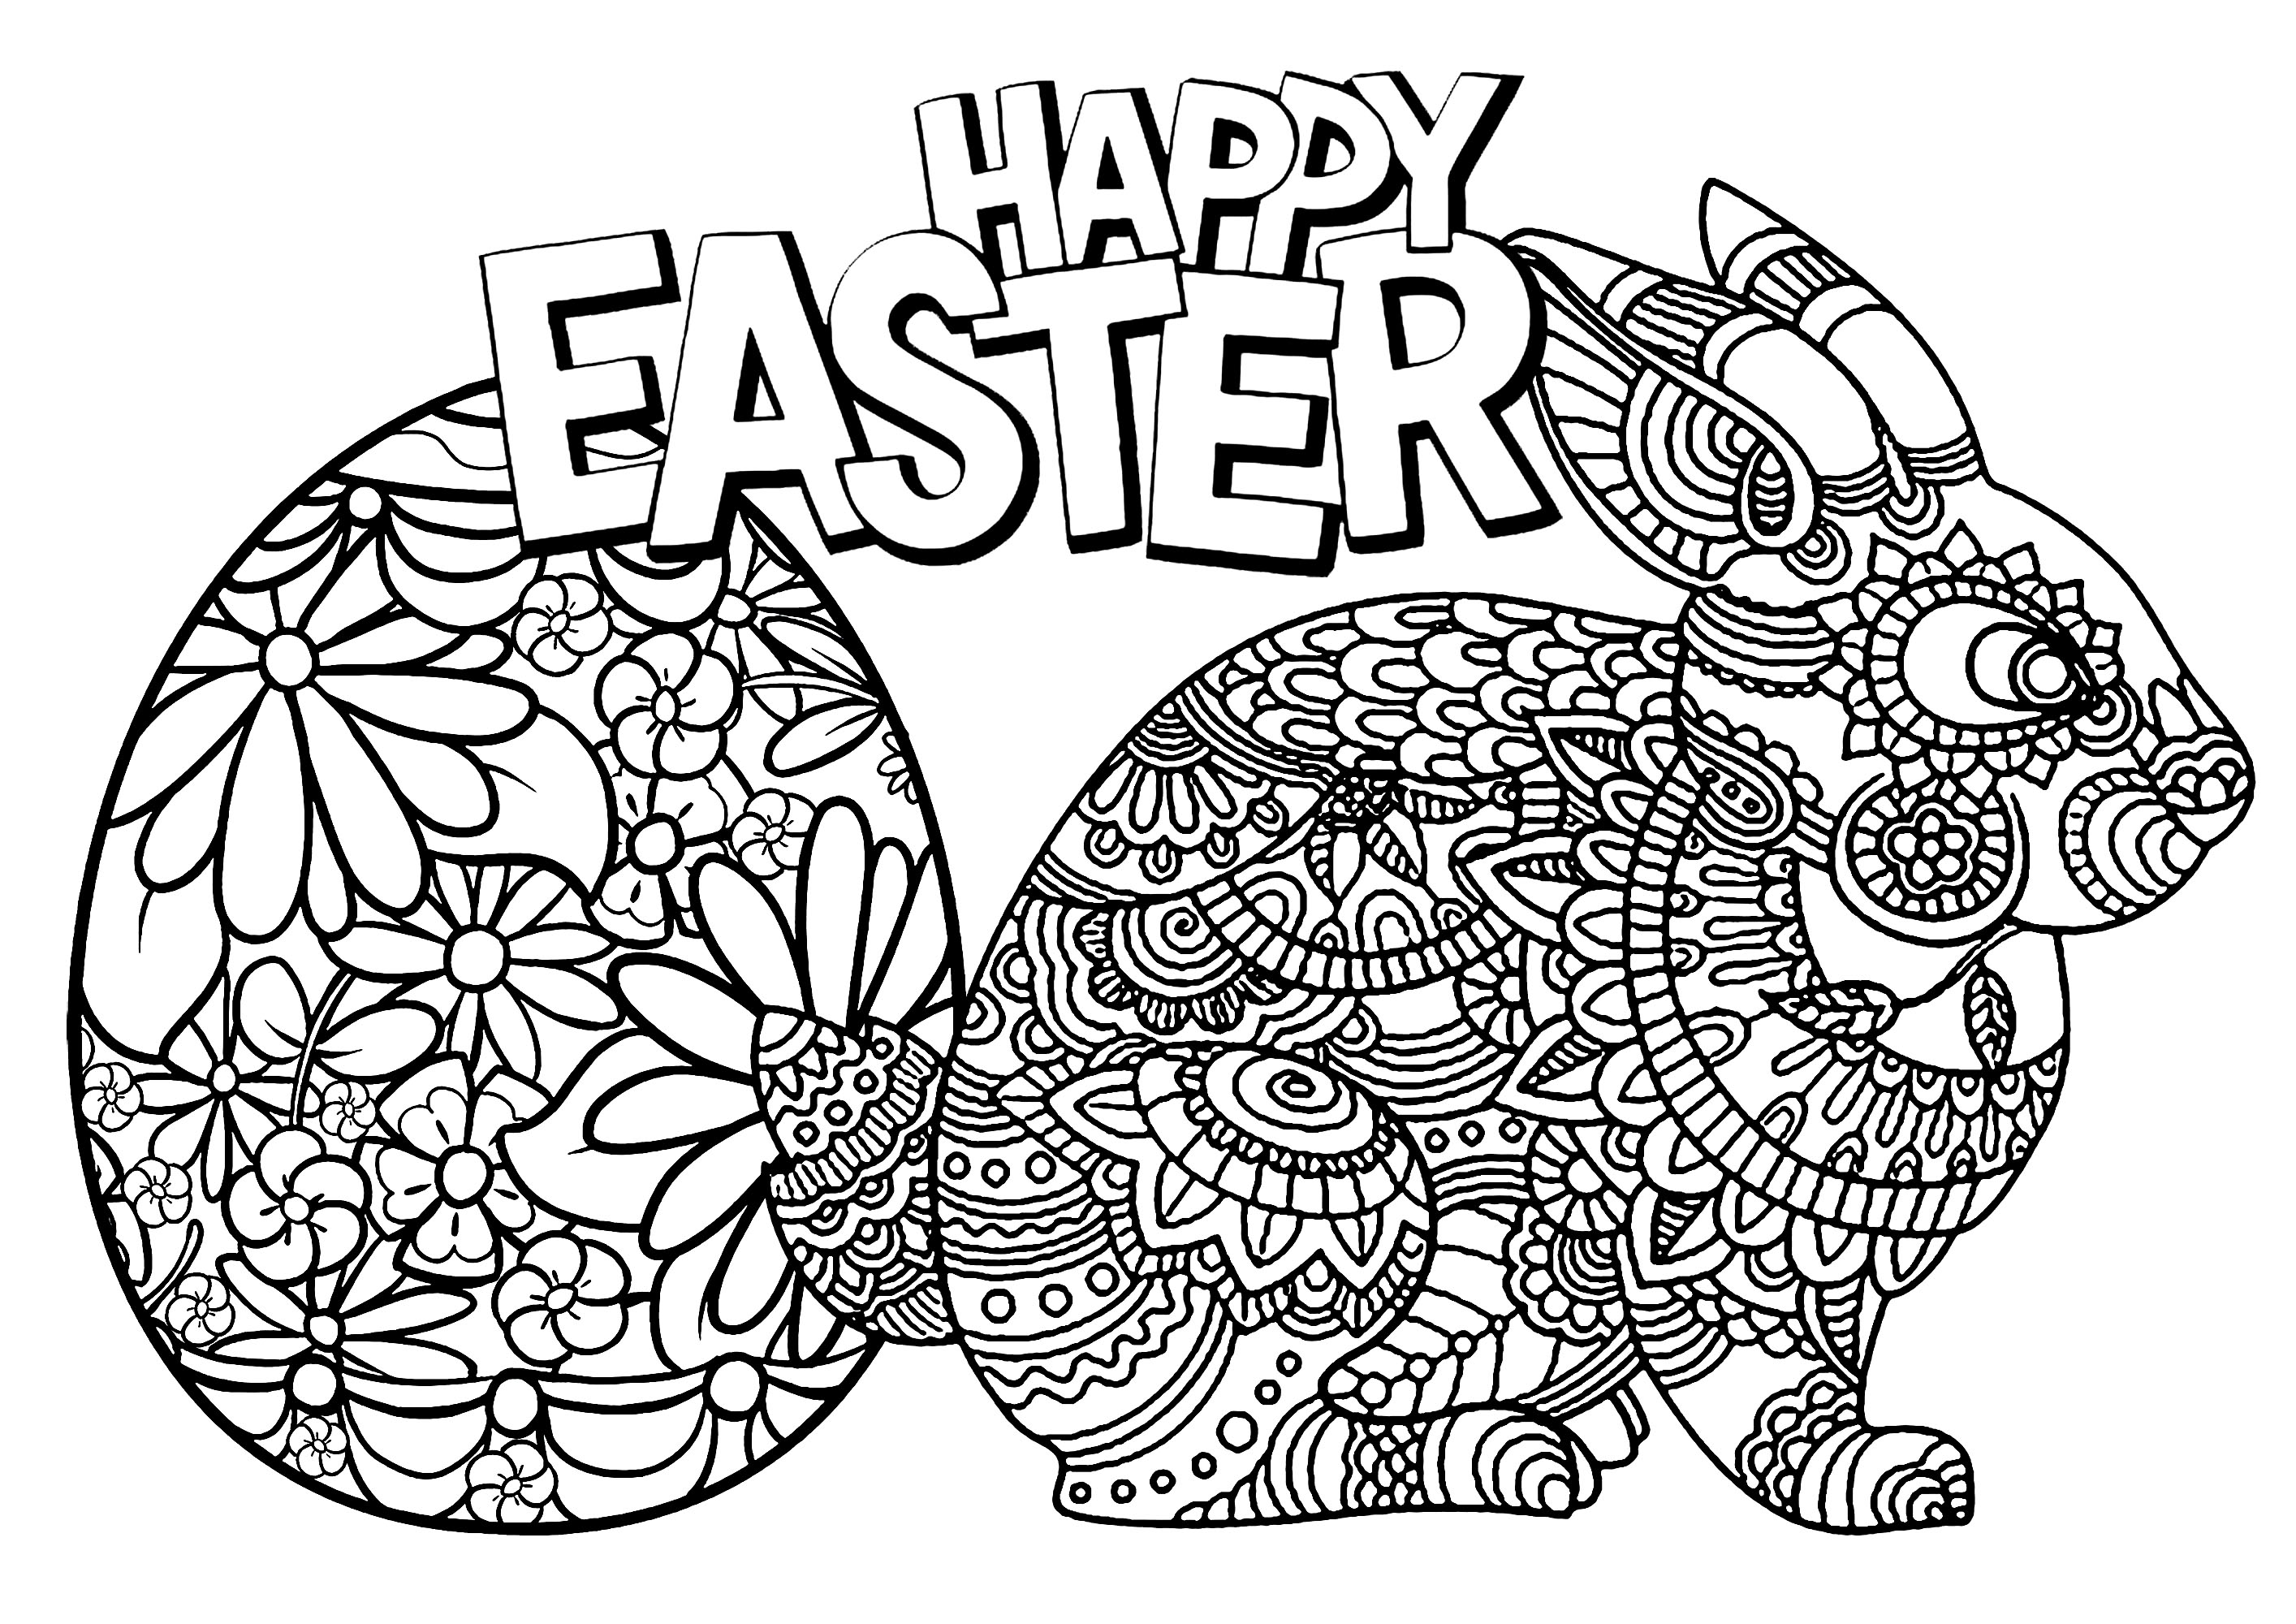 Easter egg and rabbit, with patterns, and text 'Happy Easter', Artist : Art. Isabelle